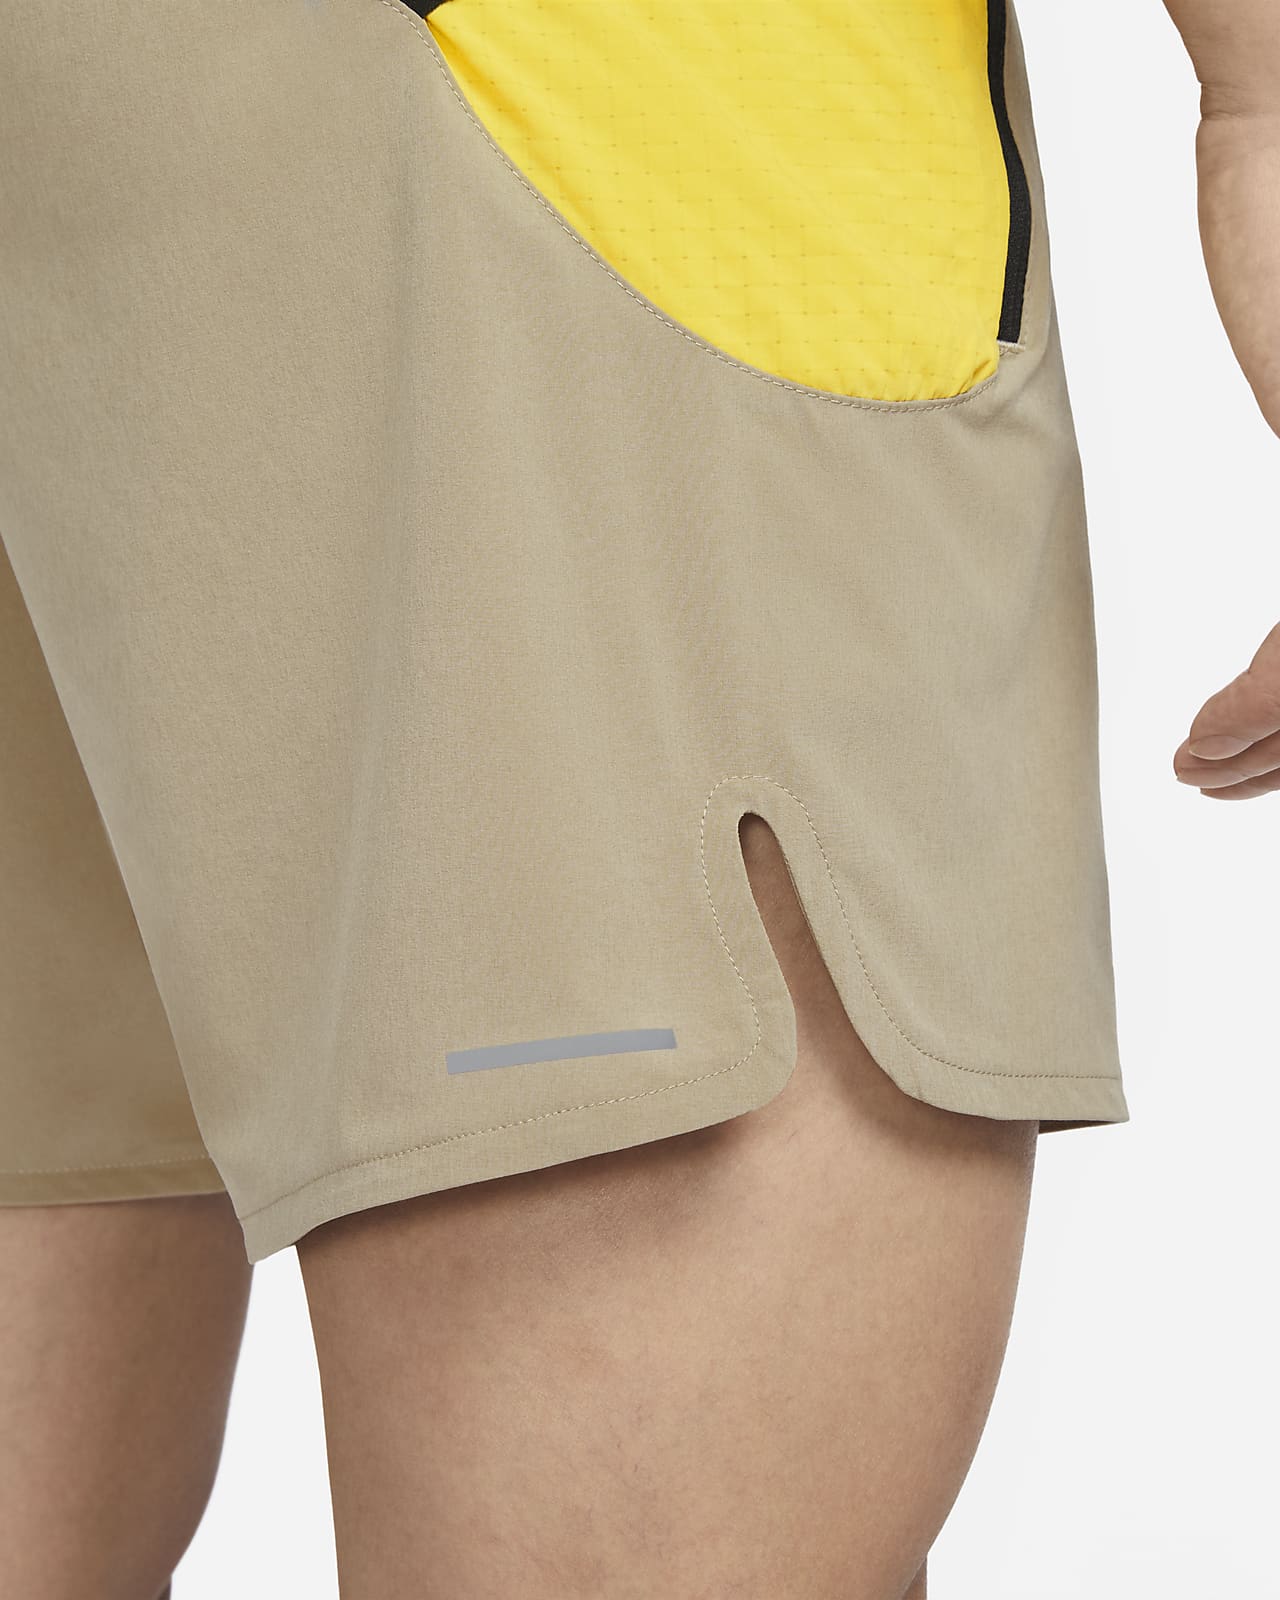 Nike Trail Second Men's 7" Brief-Lined Running Shorts. .com